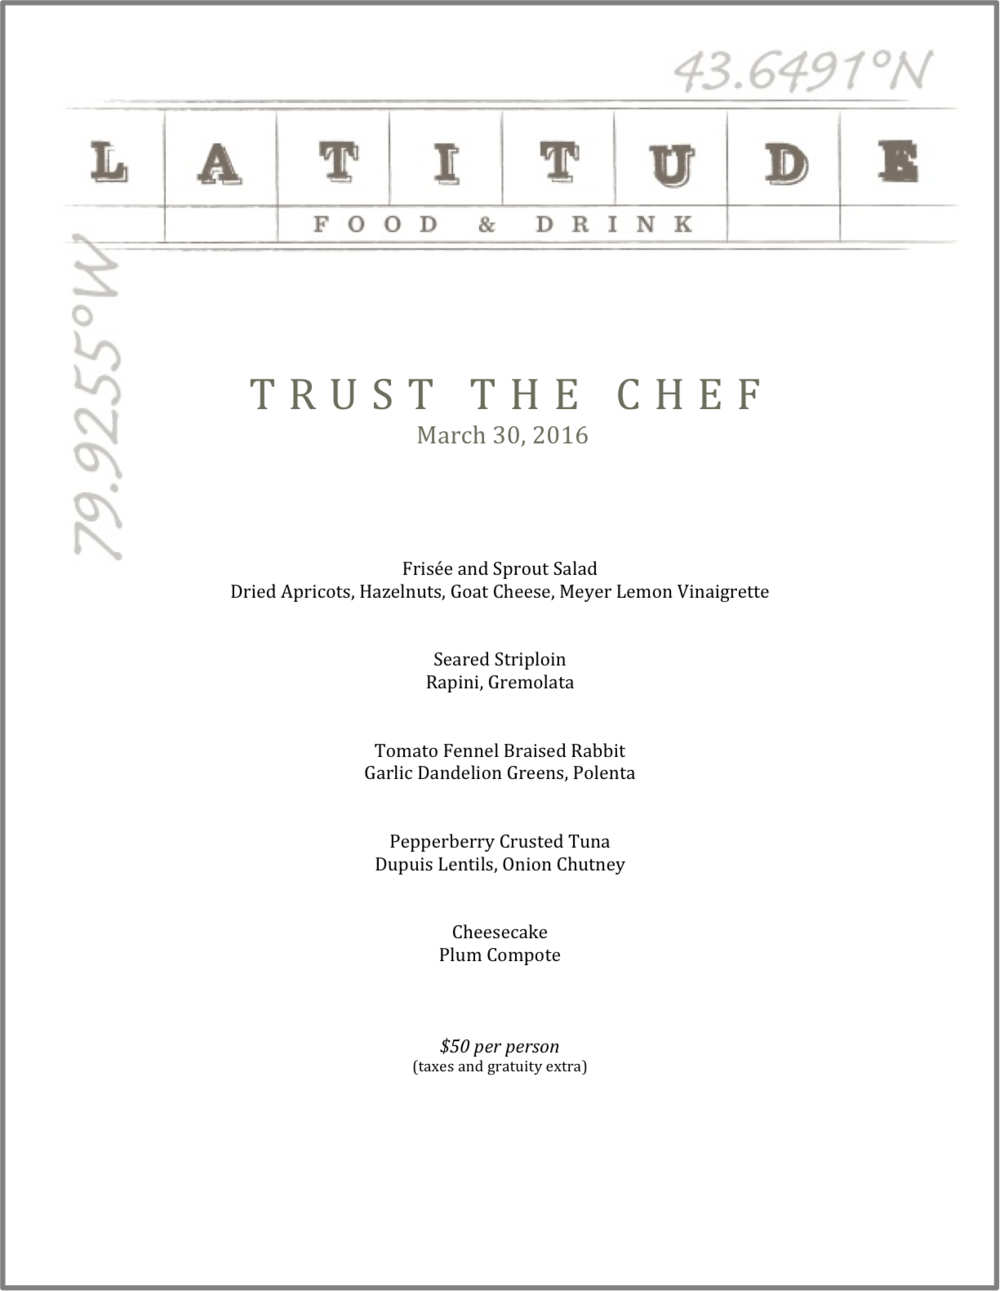          The above is a sample Trust The Chef menu.  A different Trust the Chef menu is offered every Wednesday.  Trust the Chef is available as a 5-course or a 3-course offering.                                   Please note that the regular menu is always available on Wednesday nights.                   